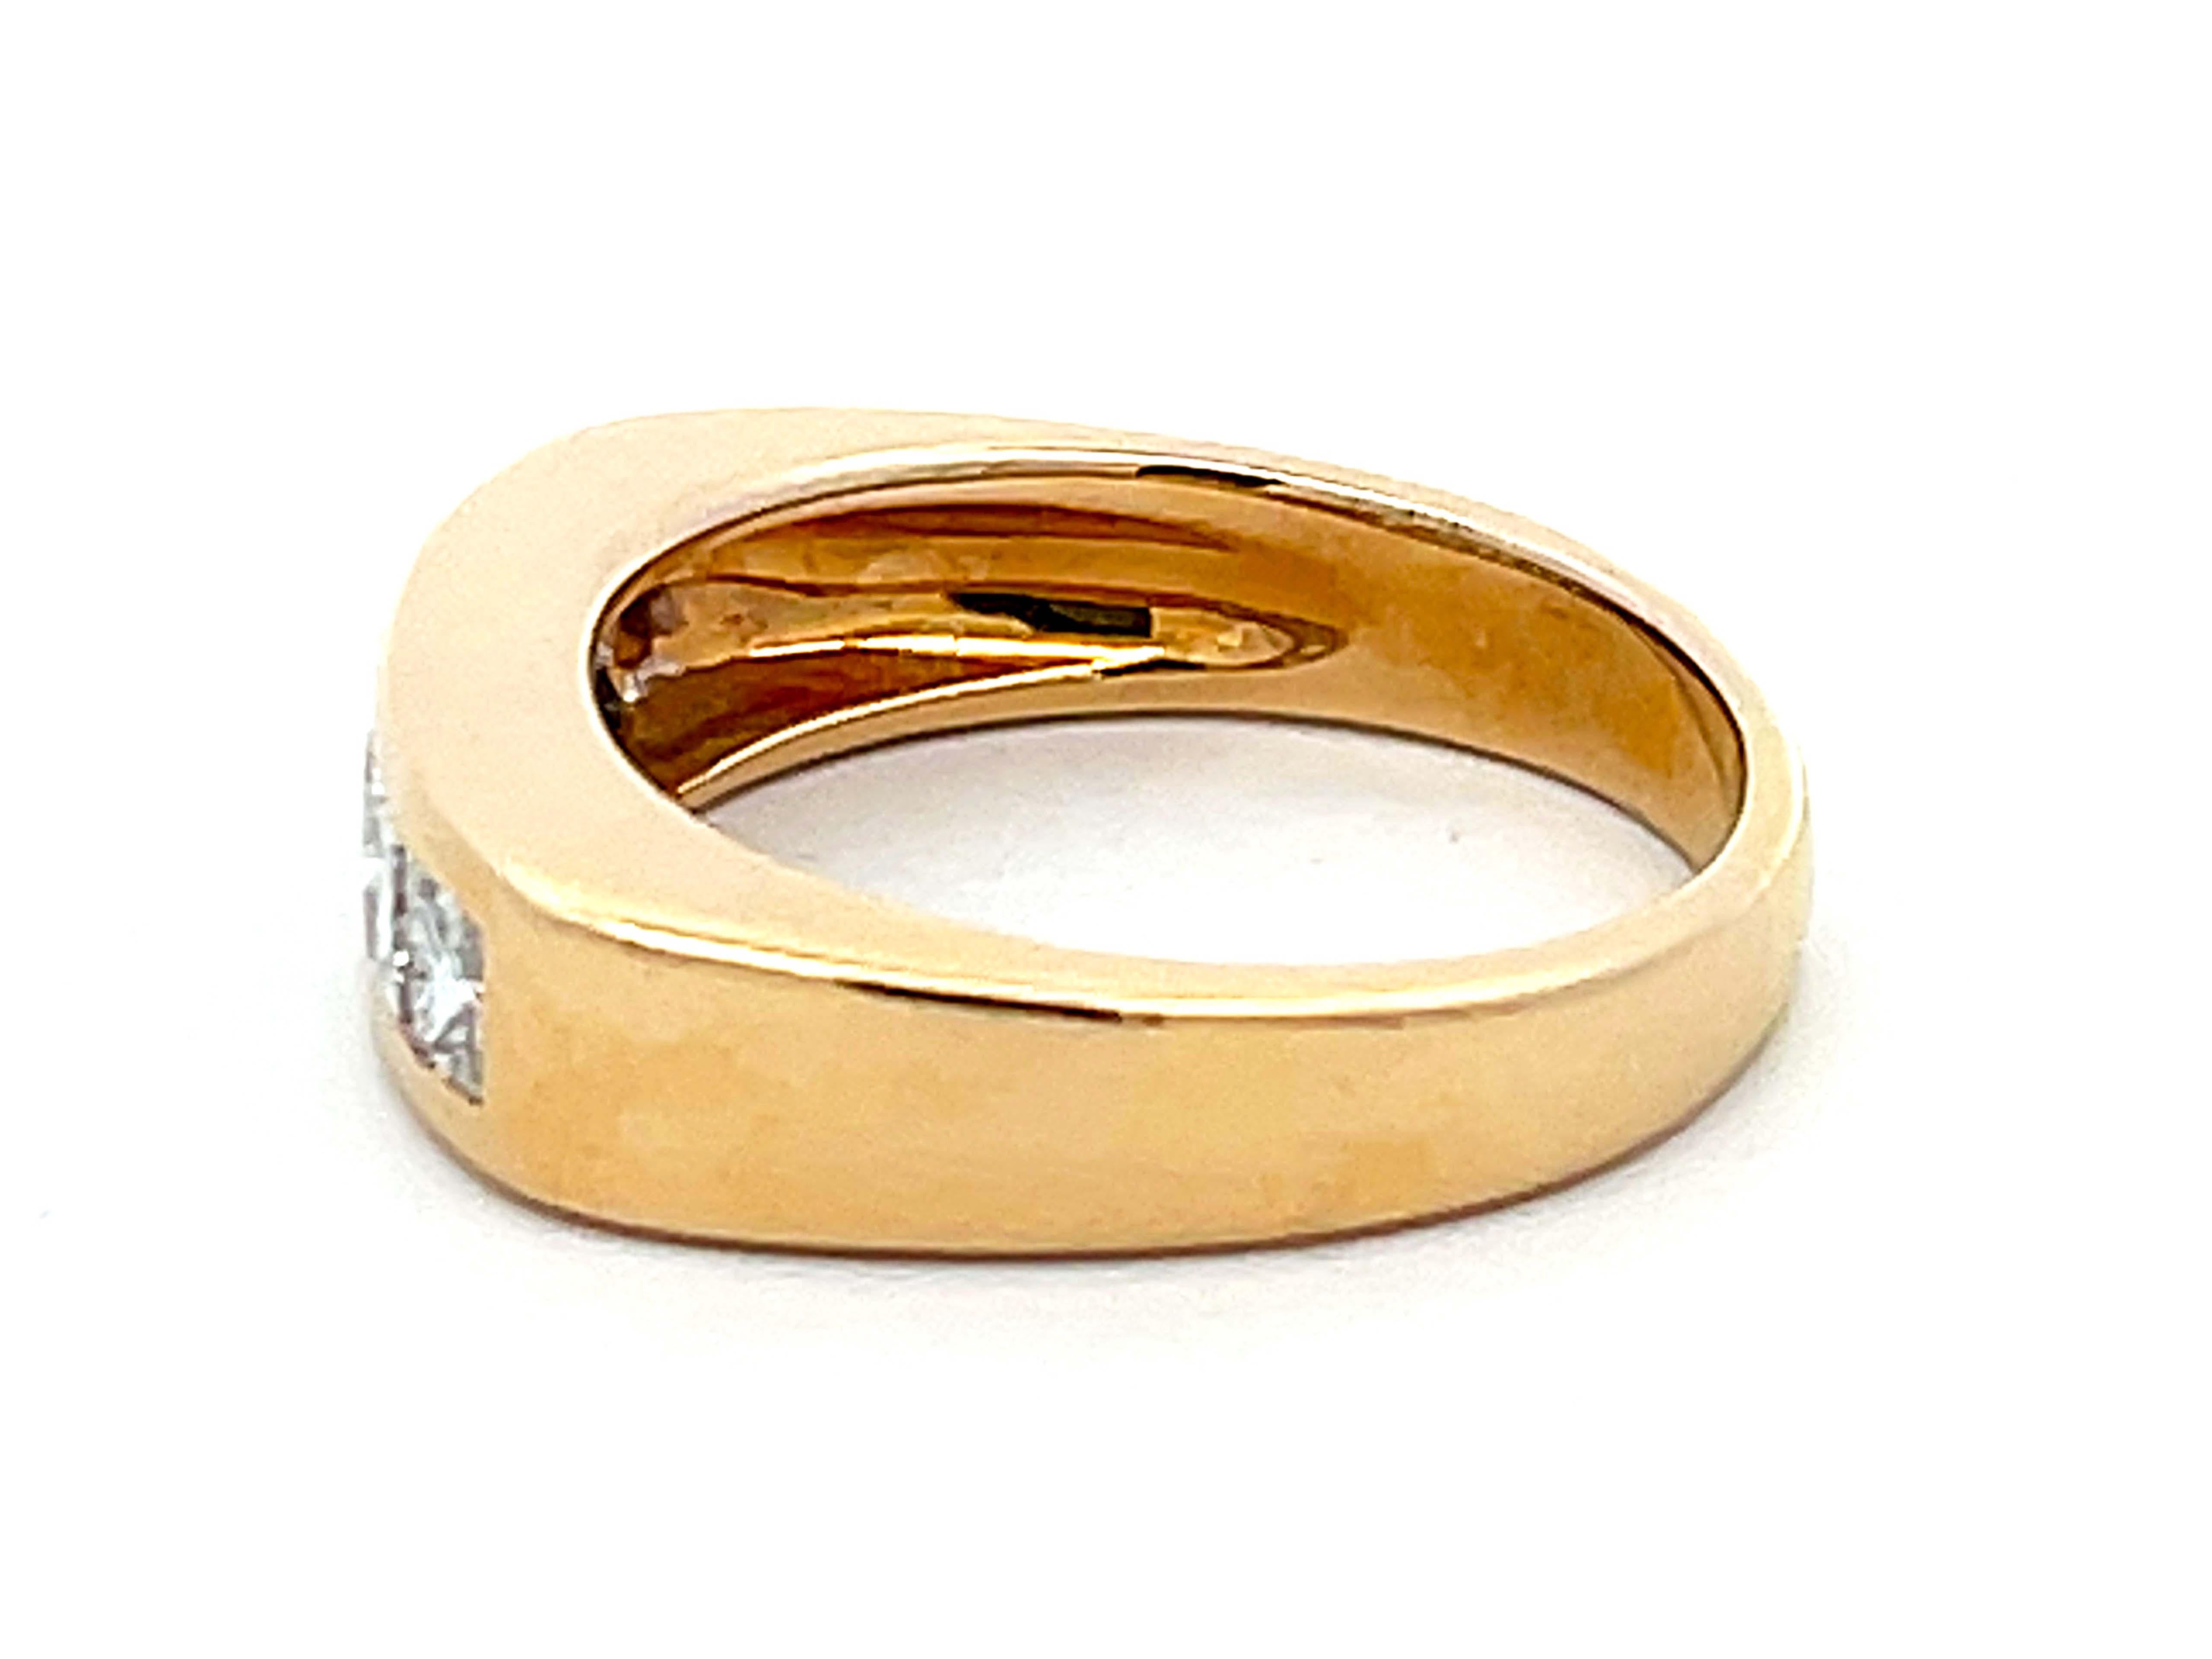 Mens 2 Carat 5 Princess Cut Diamond Band Ring in 14k Yellow Gold In Excellent Condition For Sale In Honolulu, HI